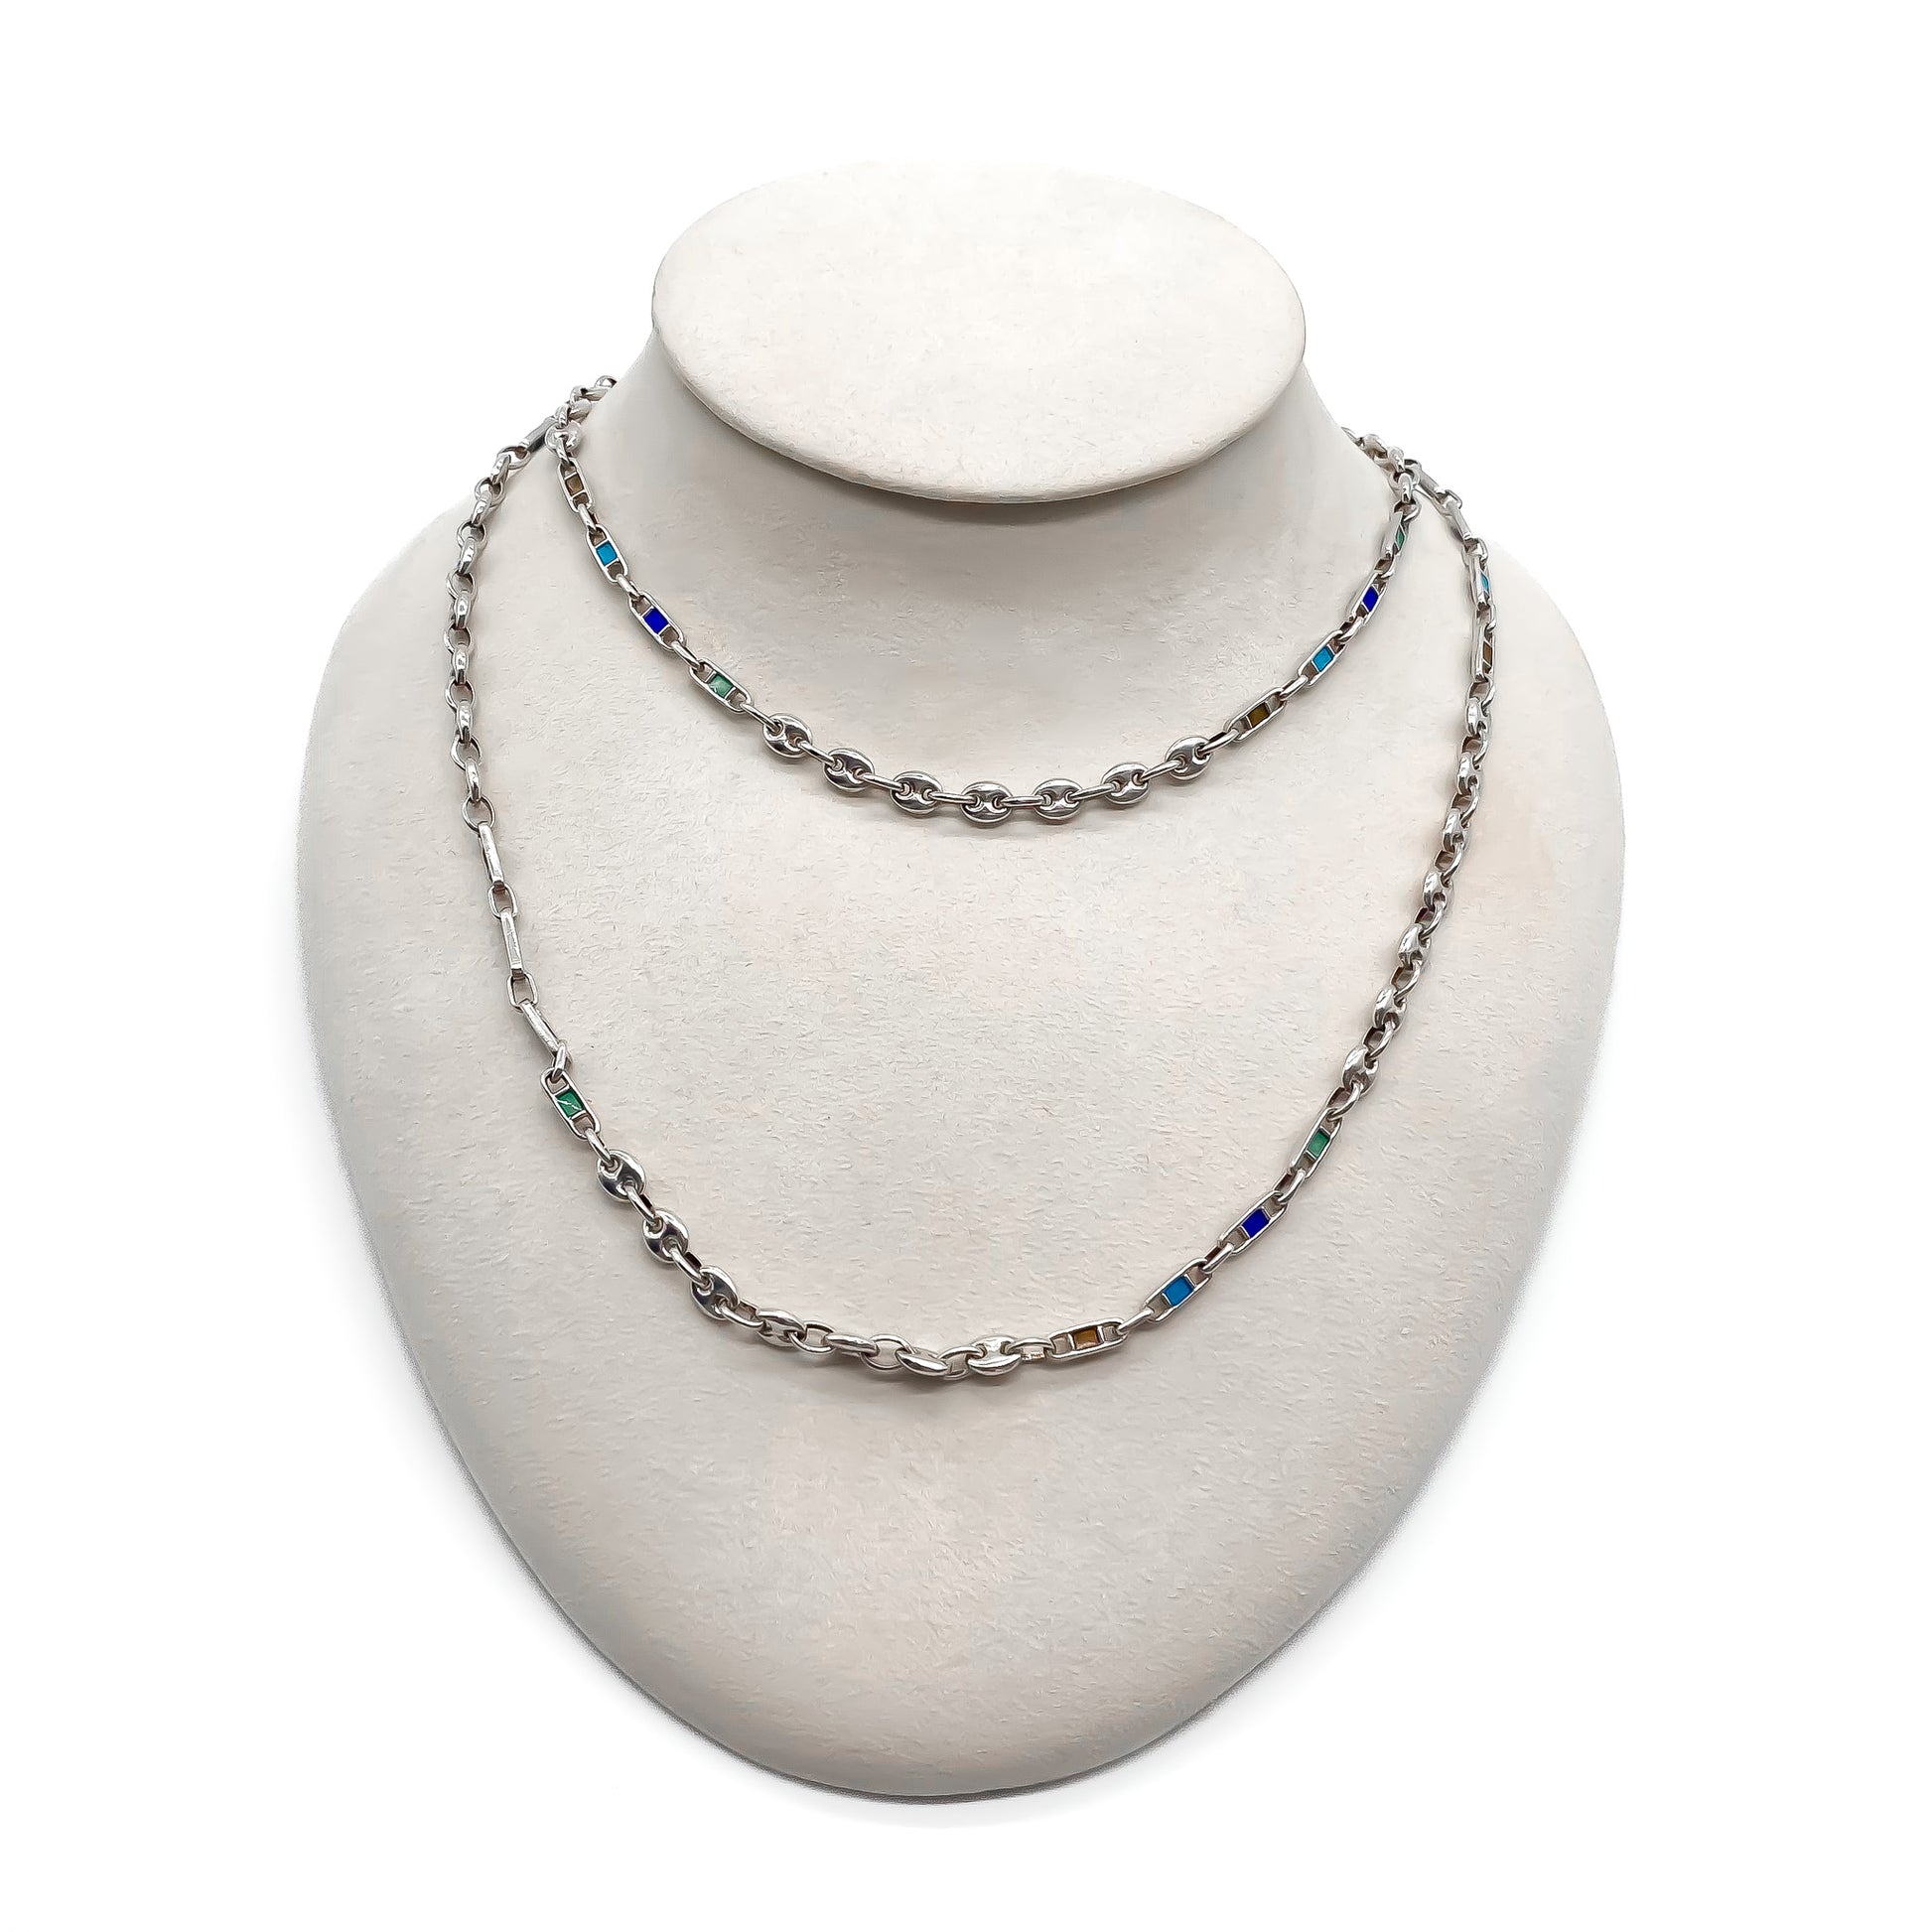 Stylish, long sterling silver Gucci link-chain with coloured enamel detail.